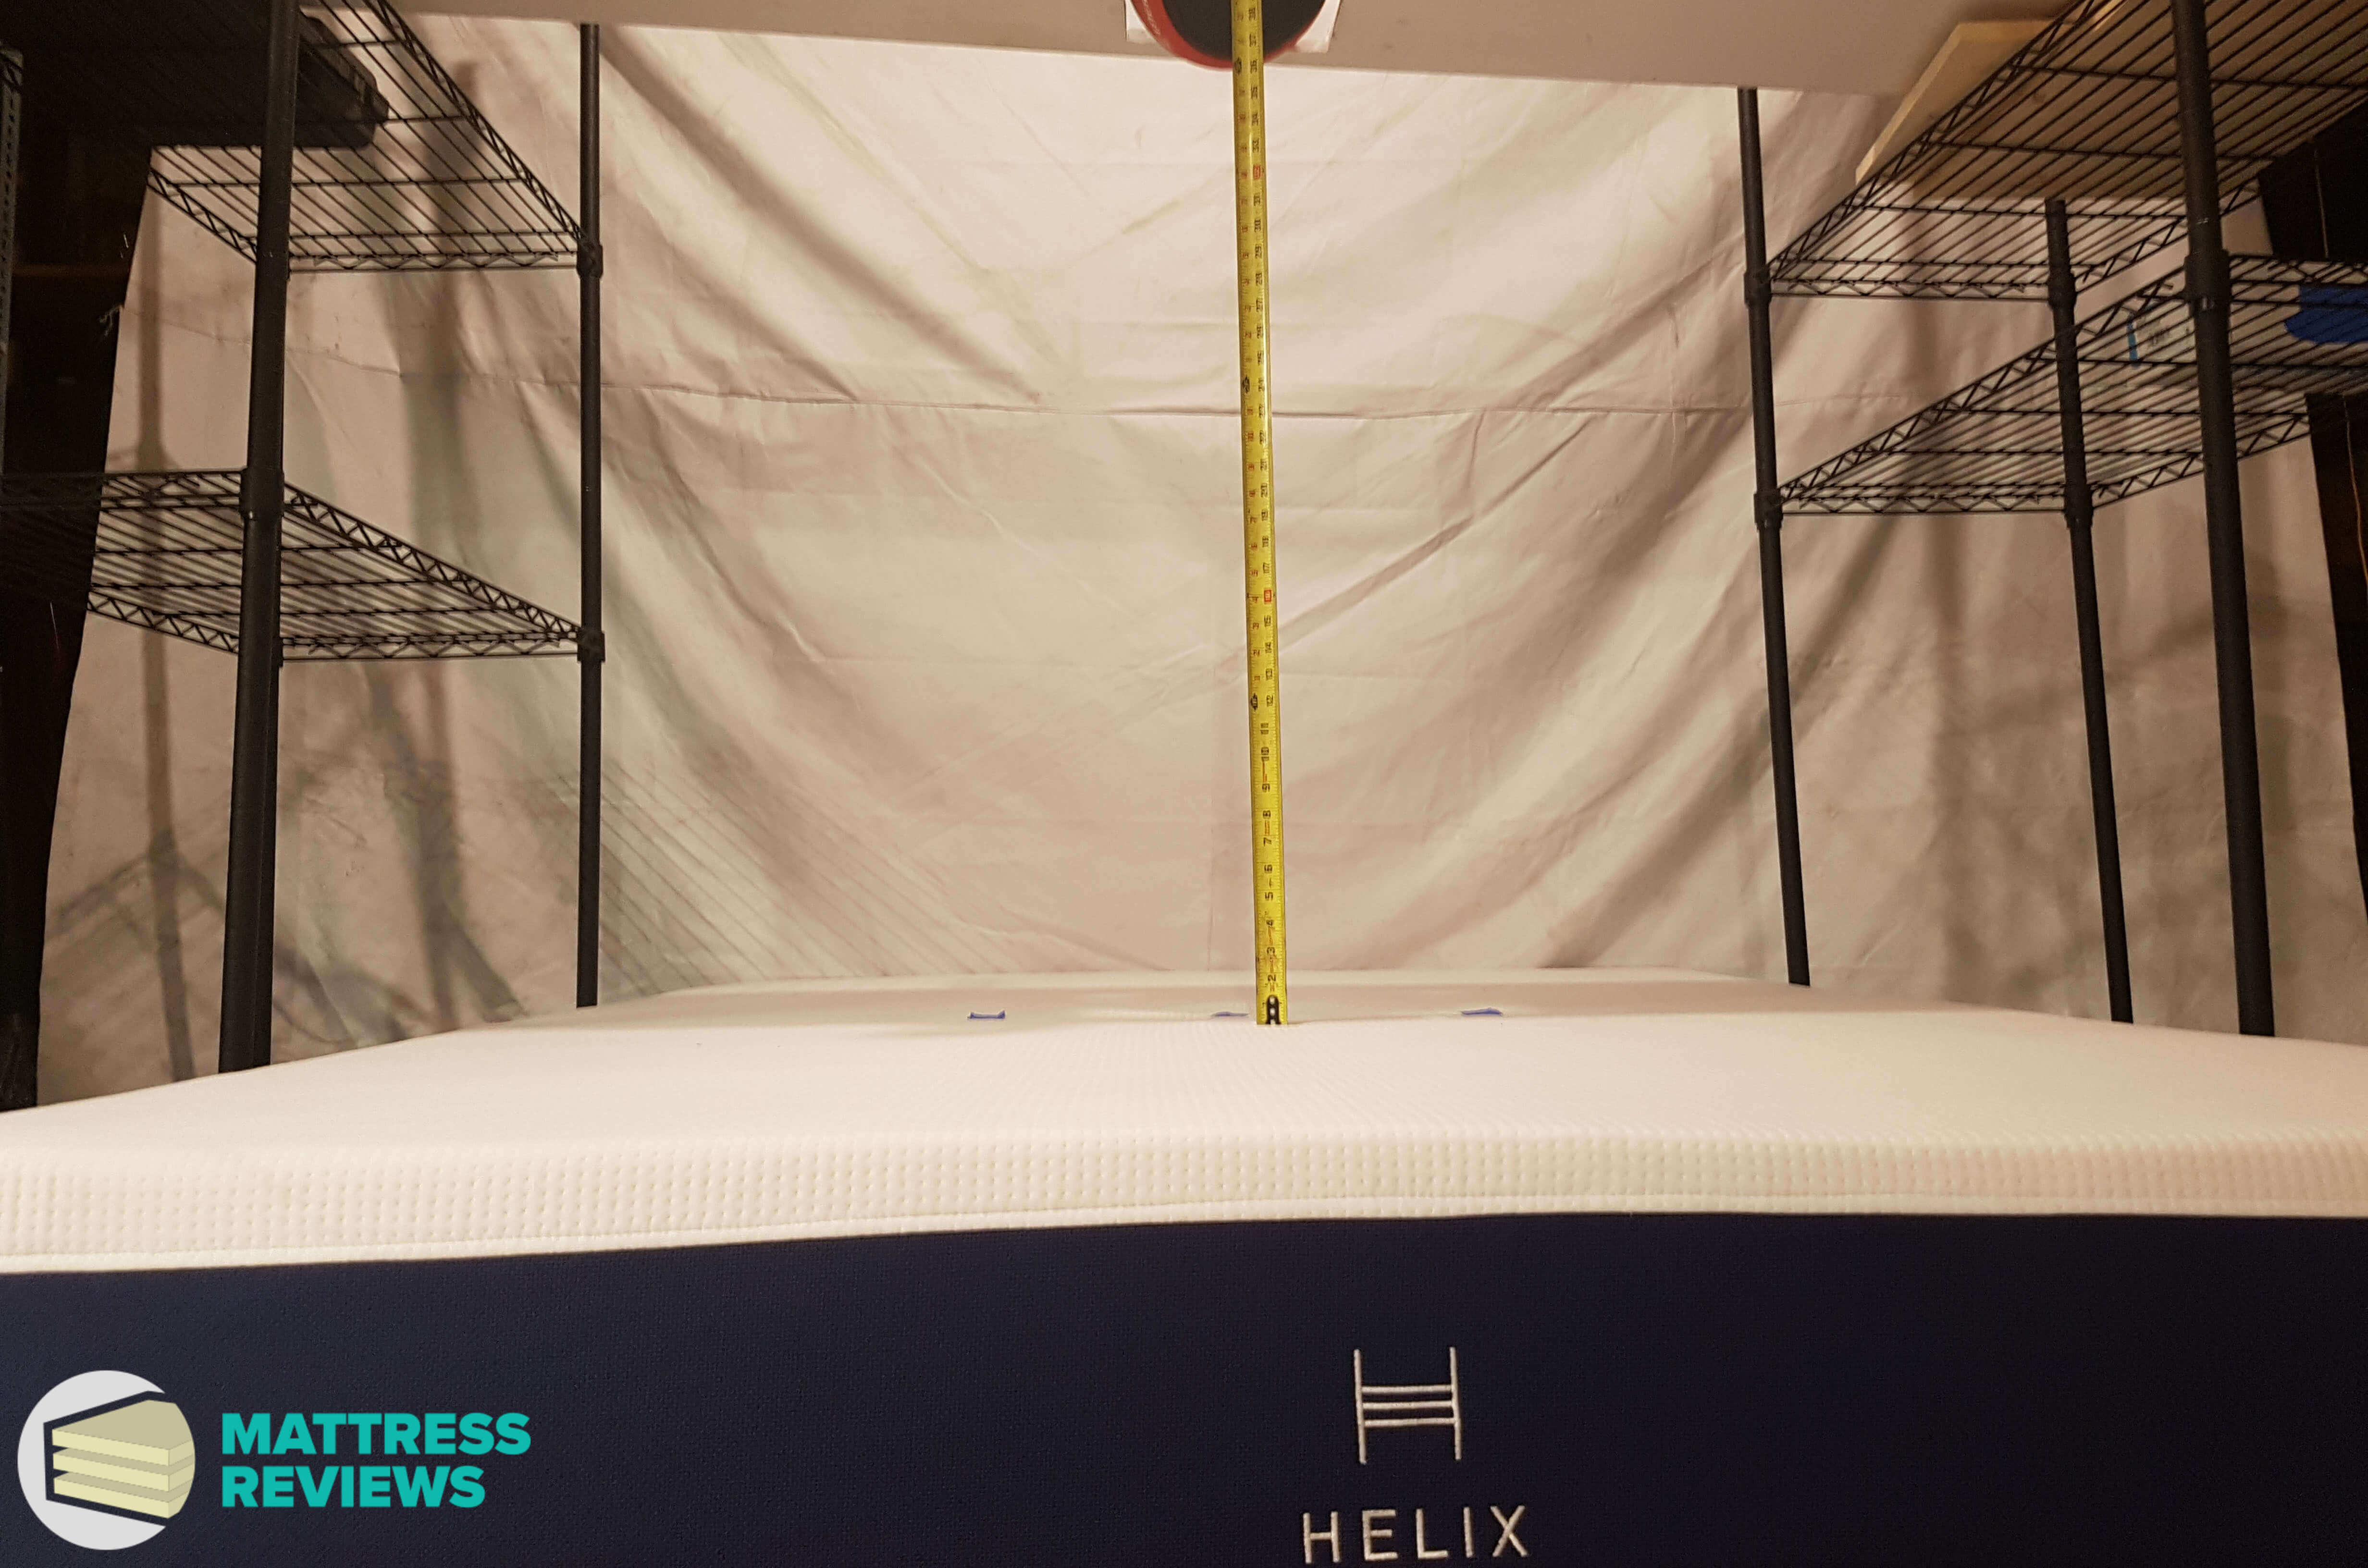 Image of the Helix mattress bounce test.